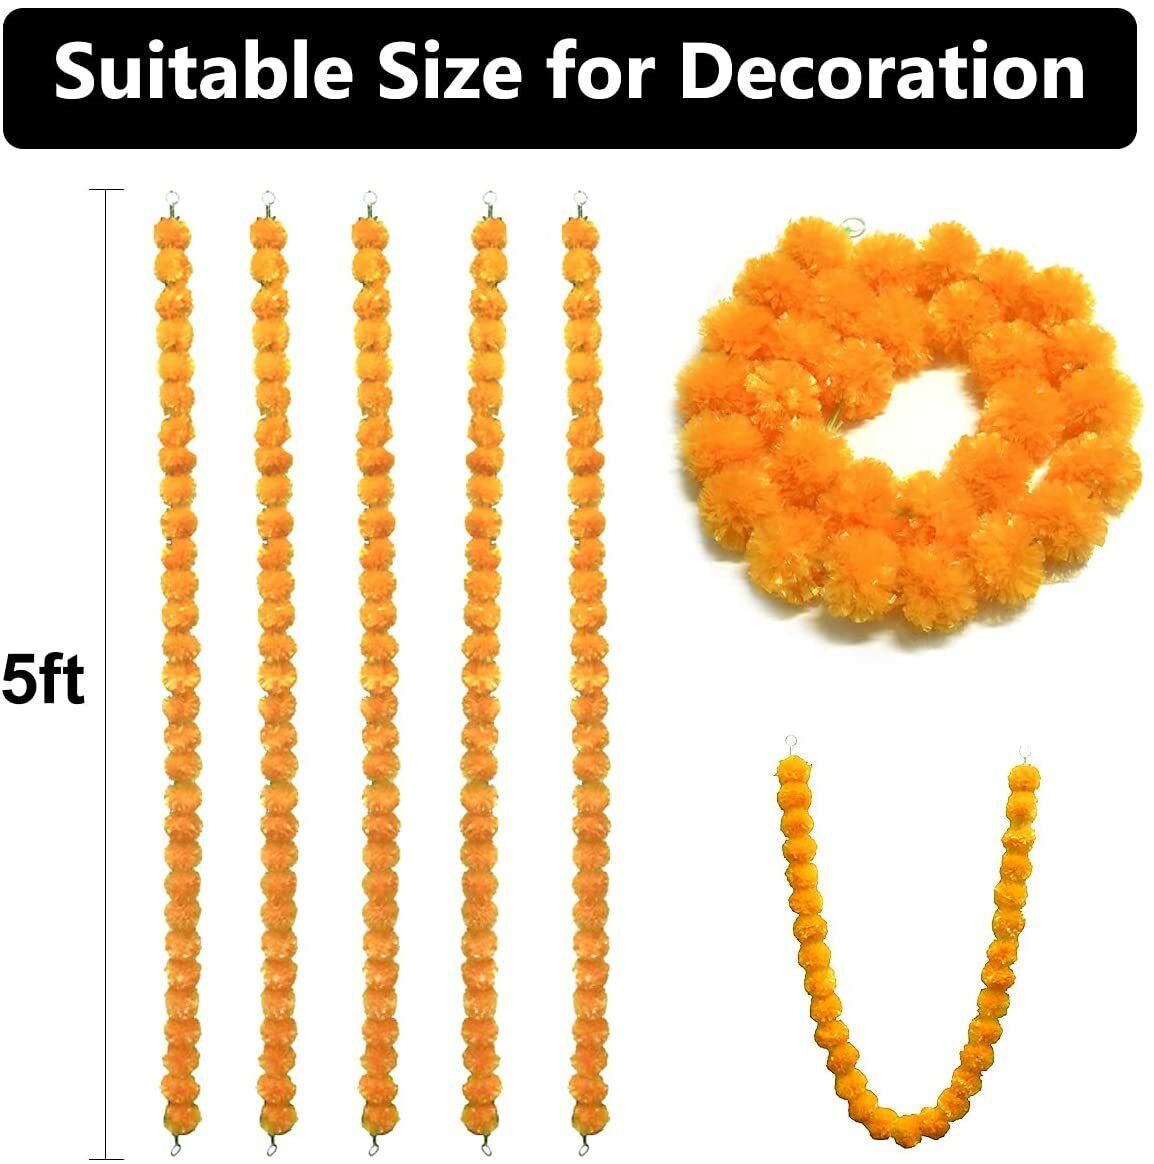 5Pack Marigold Garlands 5ft Artificial Marigold Flower Garland For Pooja/Puja TQS Does not apply - фотография #5